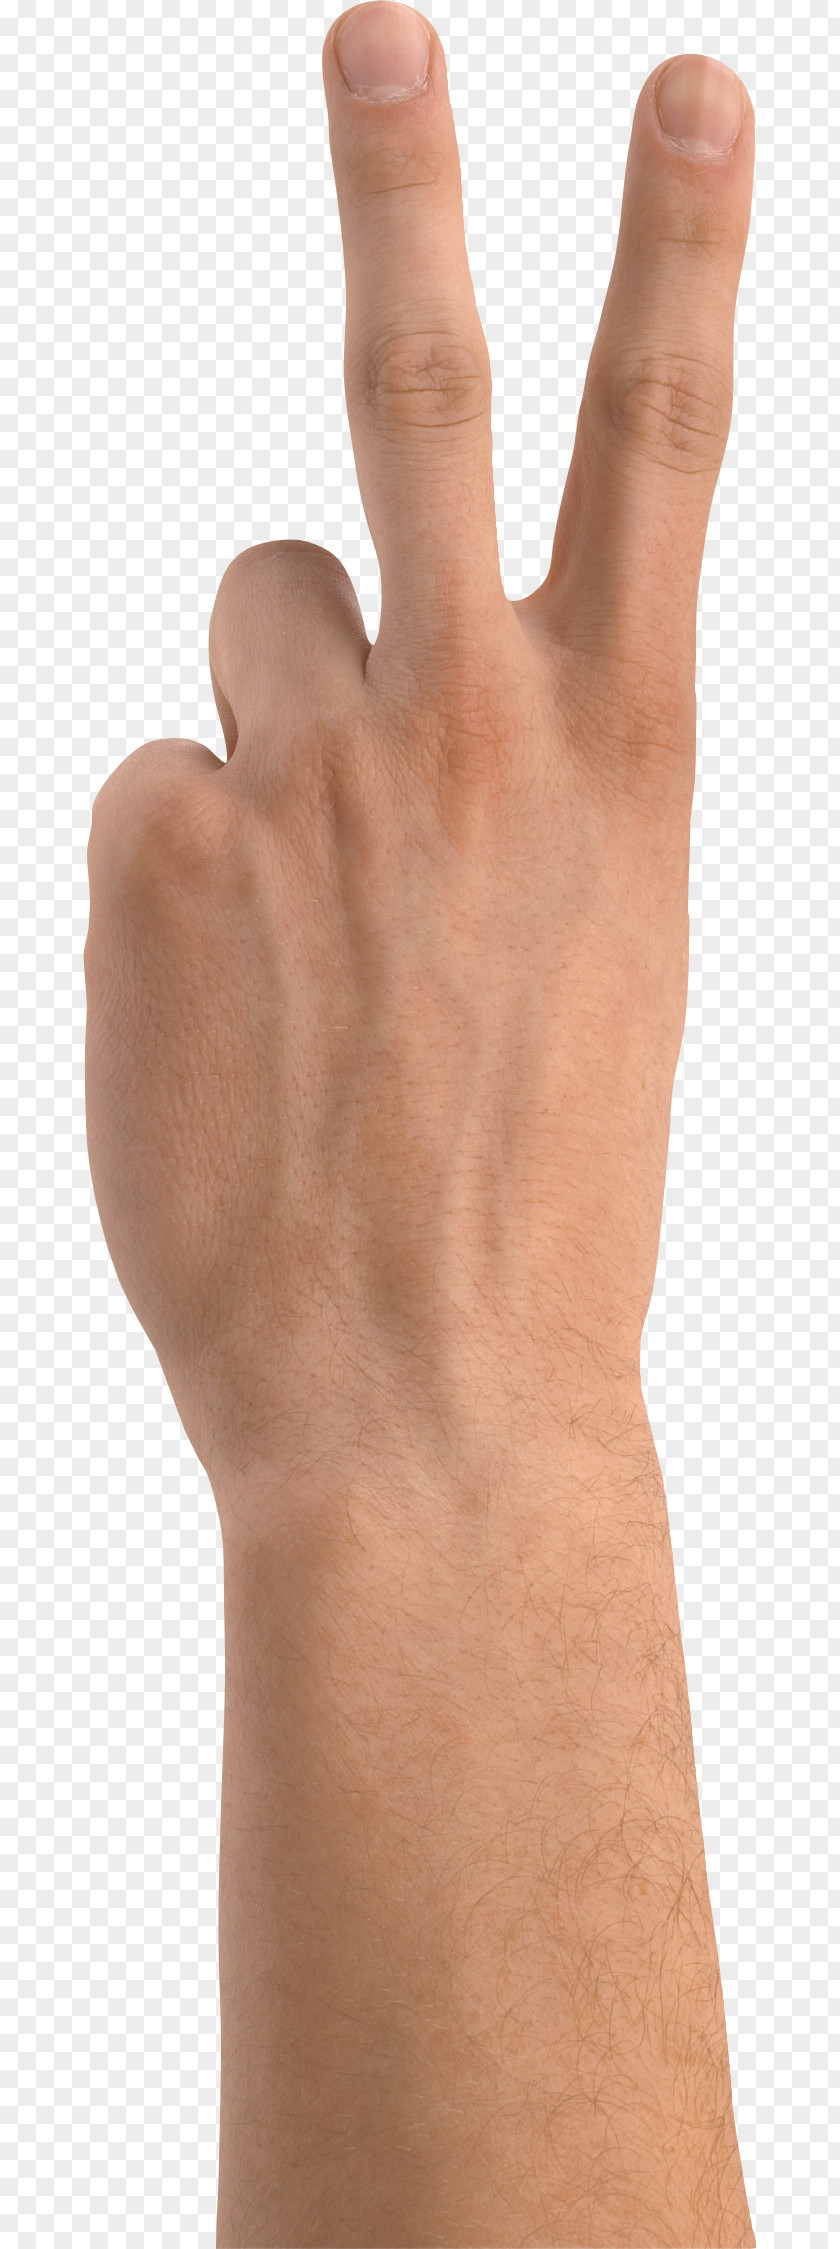 Hand Computer Icons Upper Limb Gesture PNG limb Gesture, hand clipart PNG